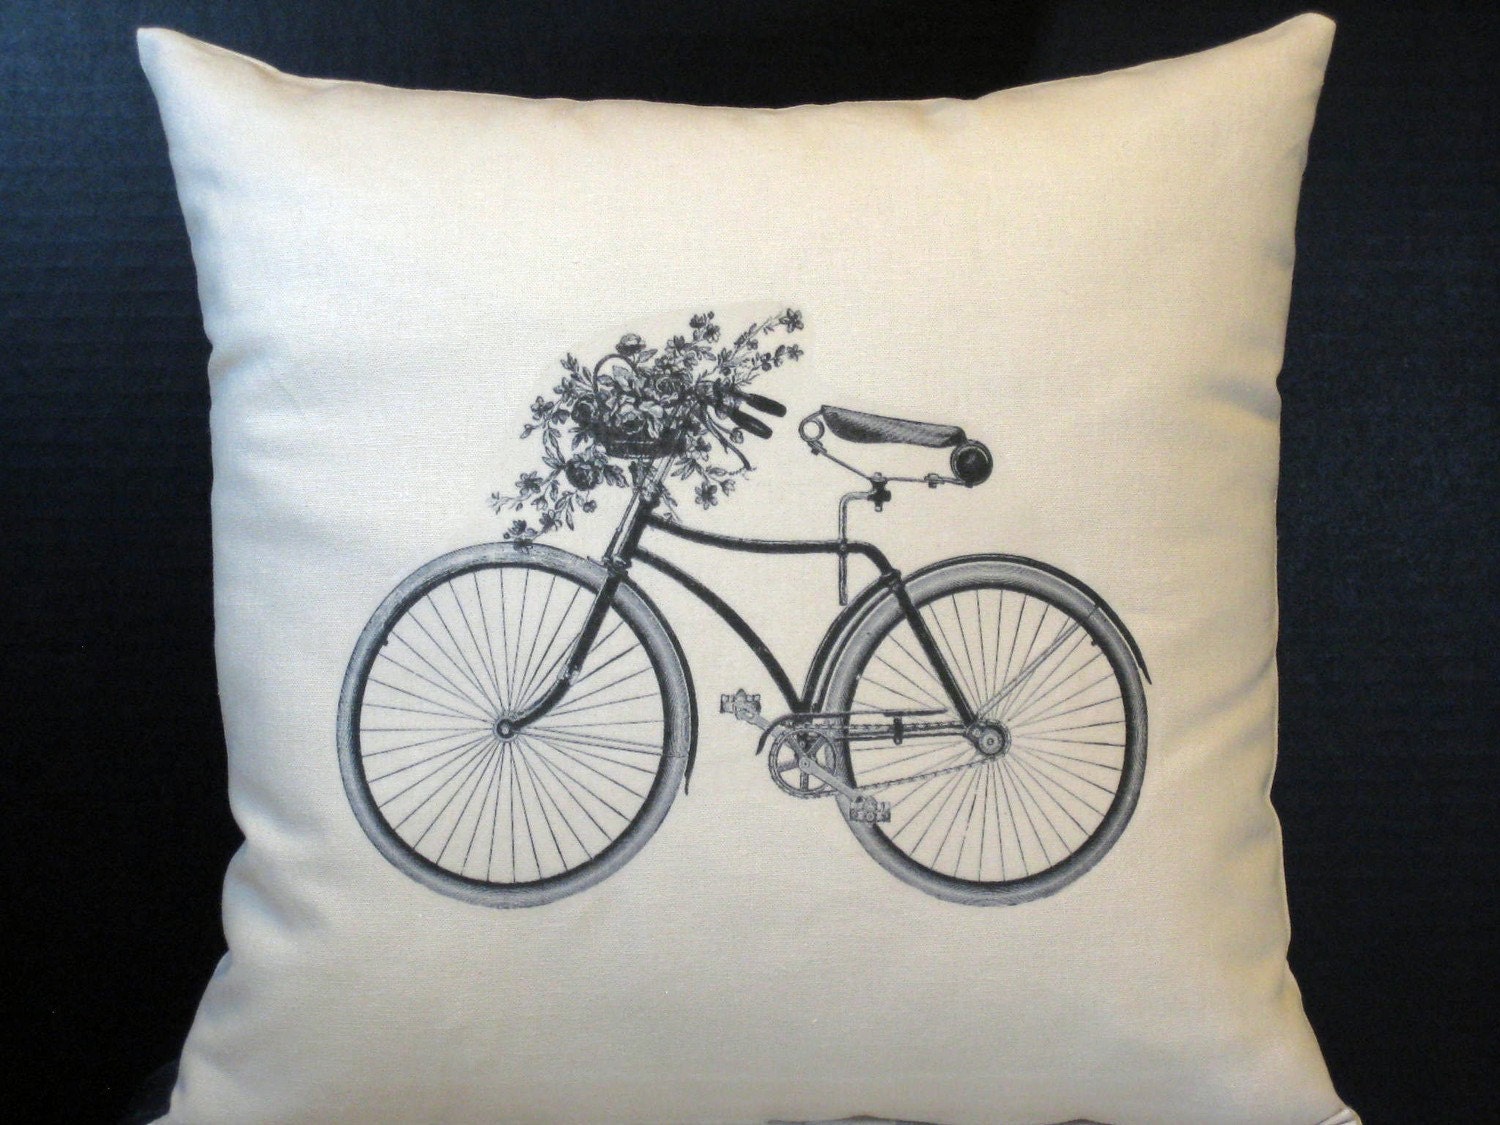 My Vintage Bicycle Pillow